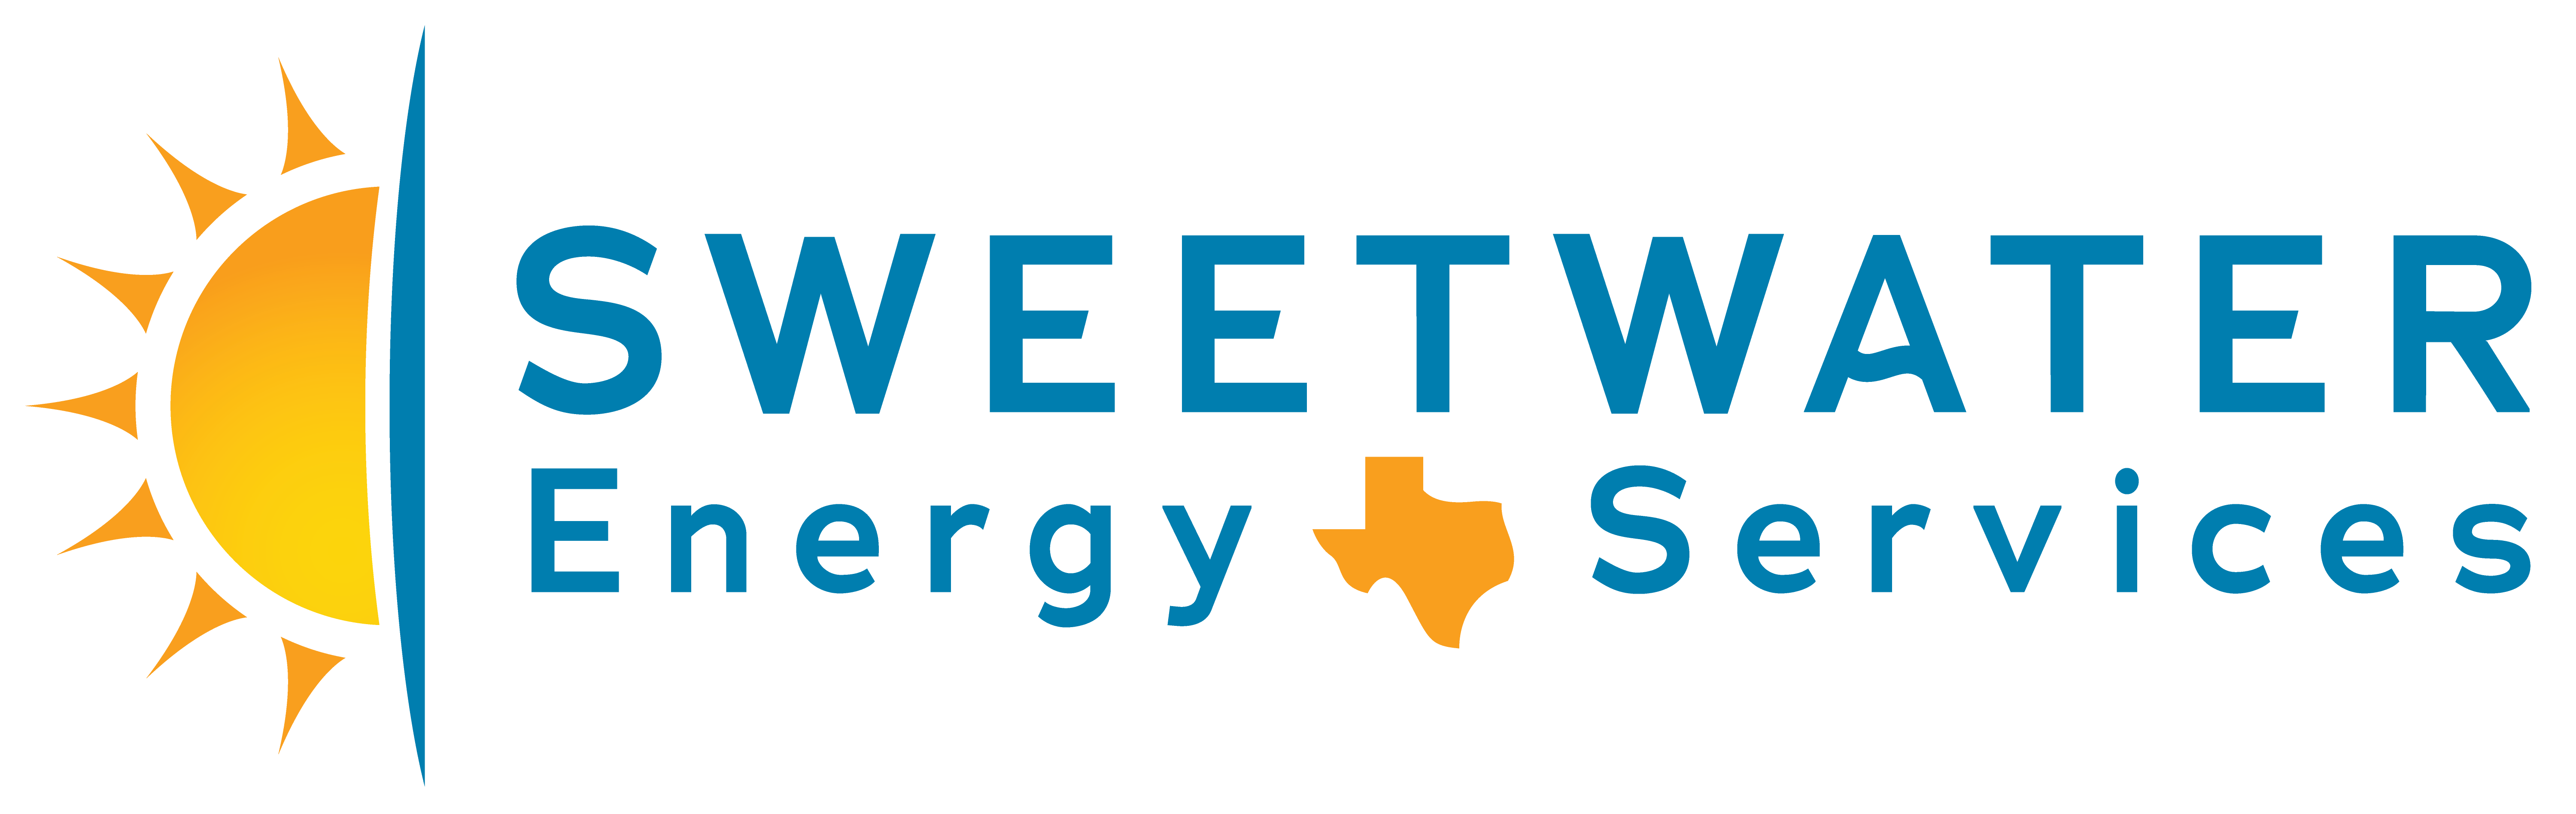 Sweetwater Energy Services logo